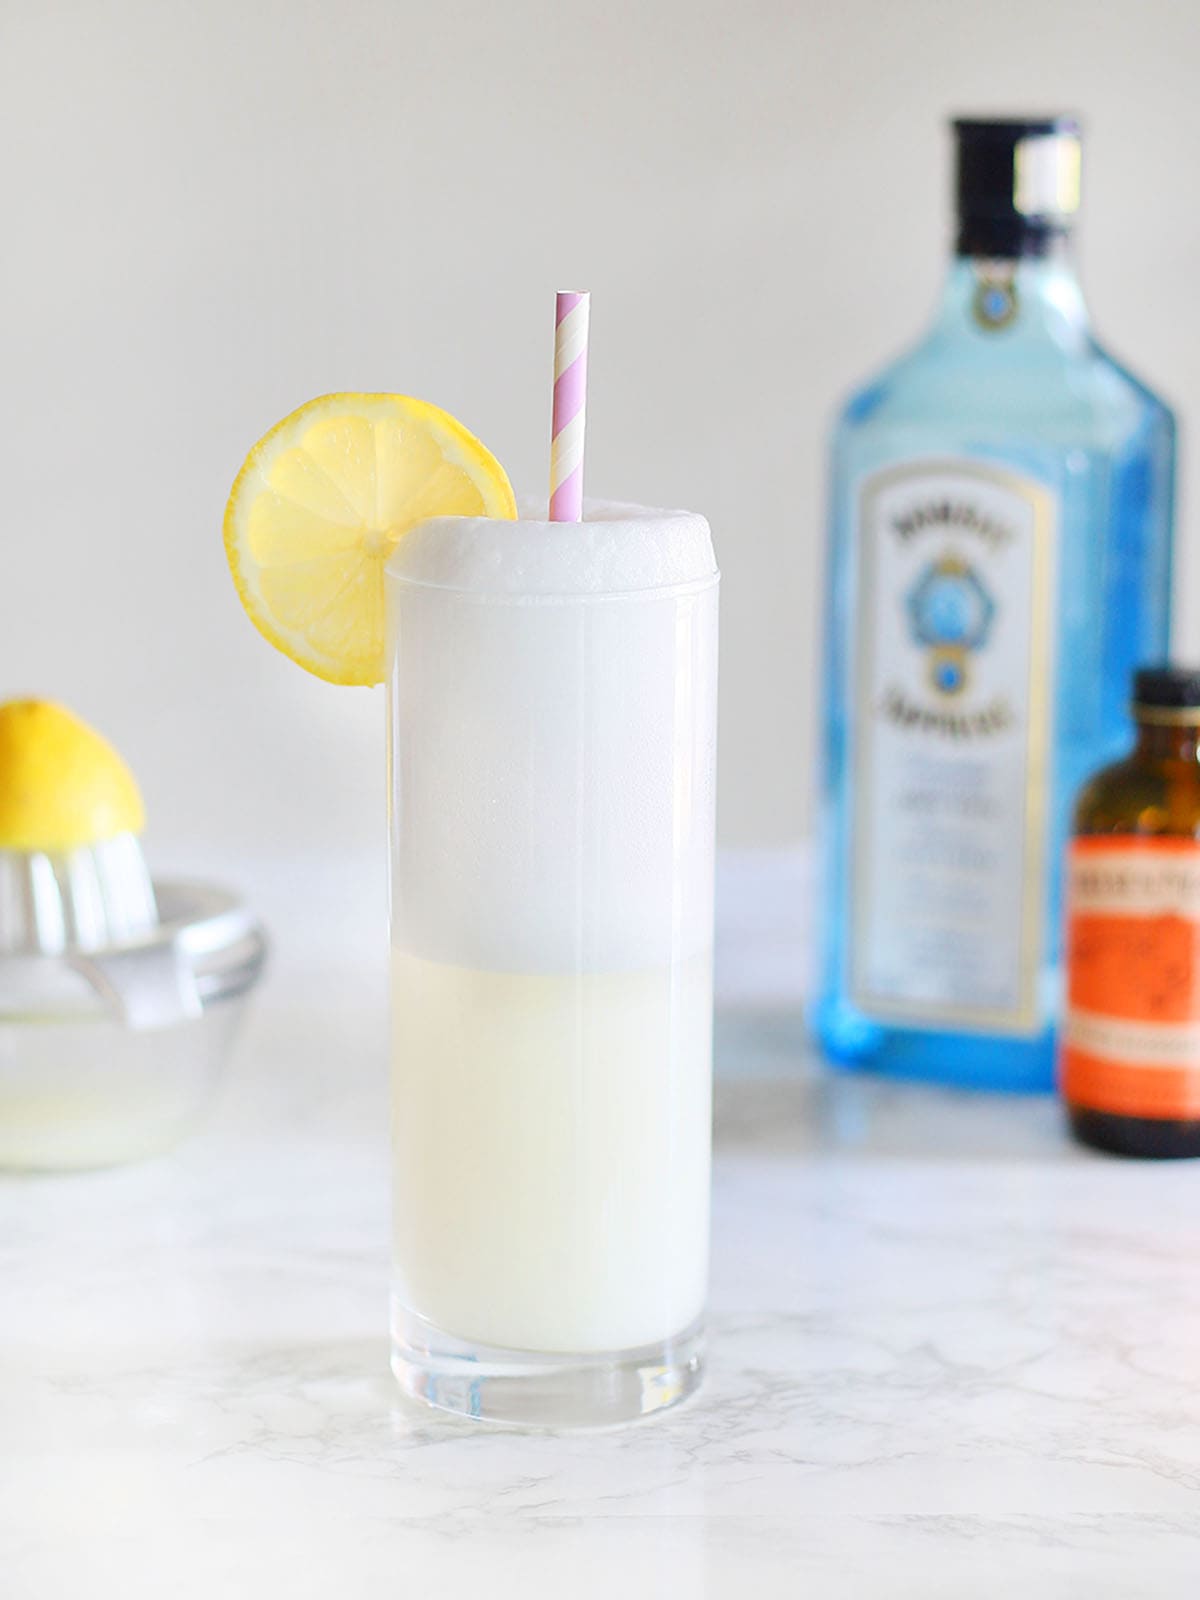 Ramos gin fizz garnished with a lemon slice and a straw on a marble table top